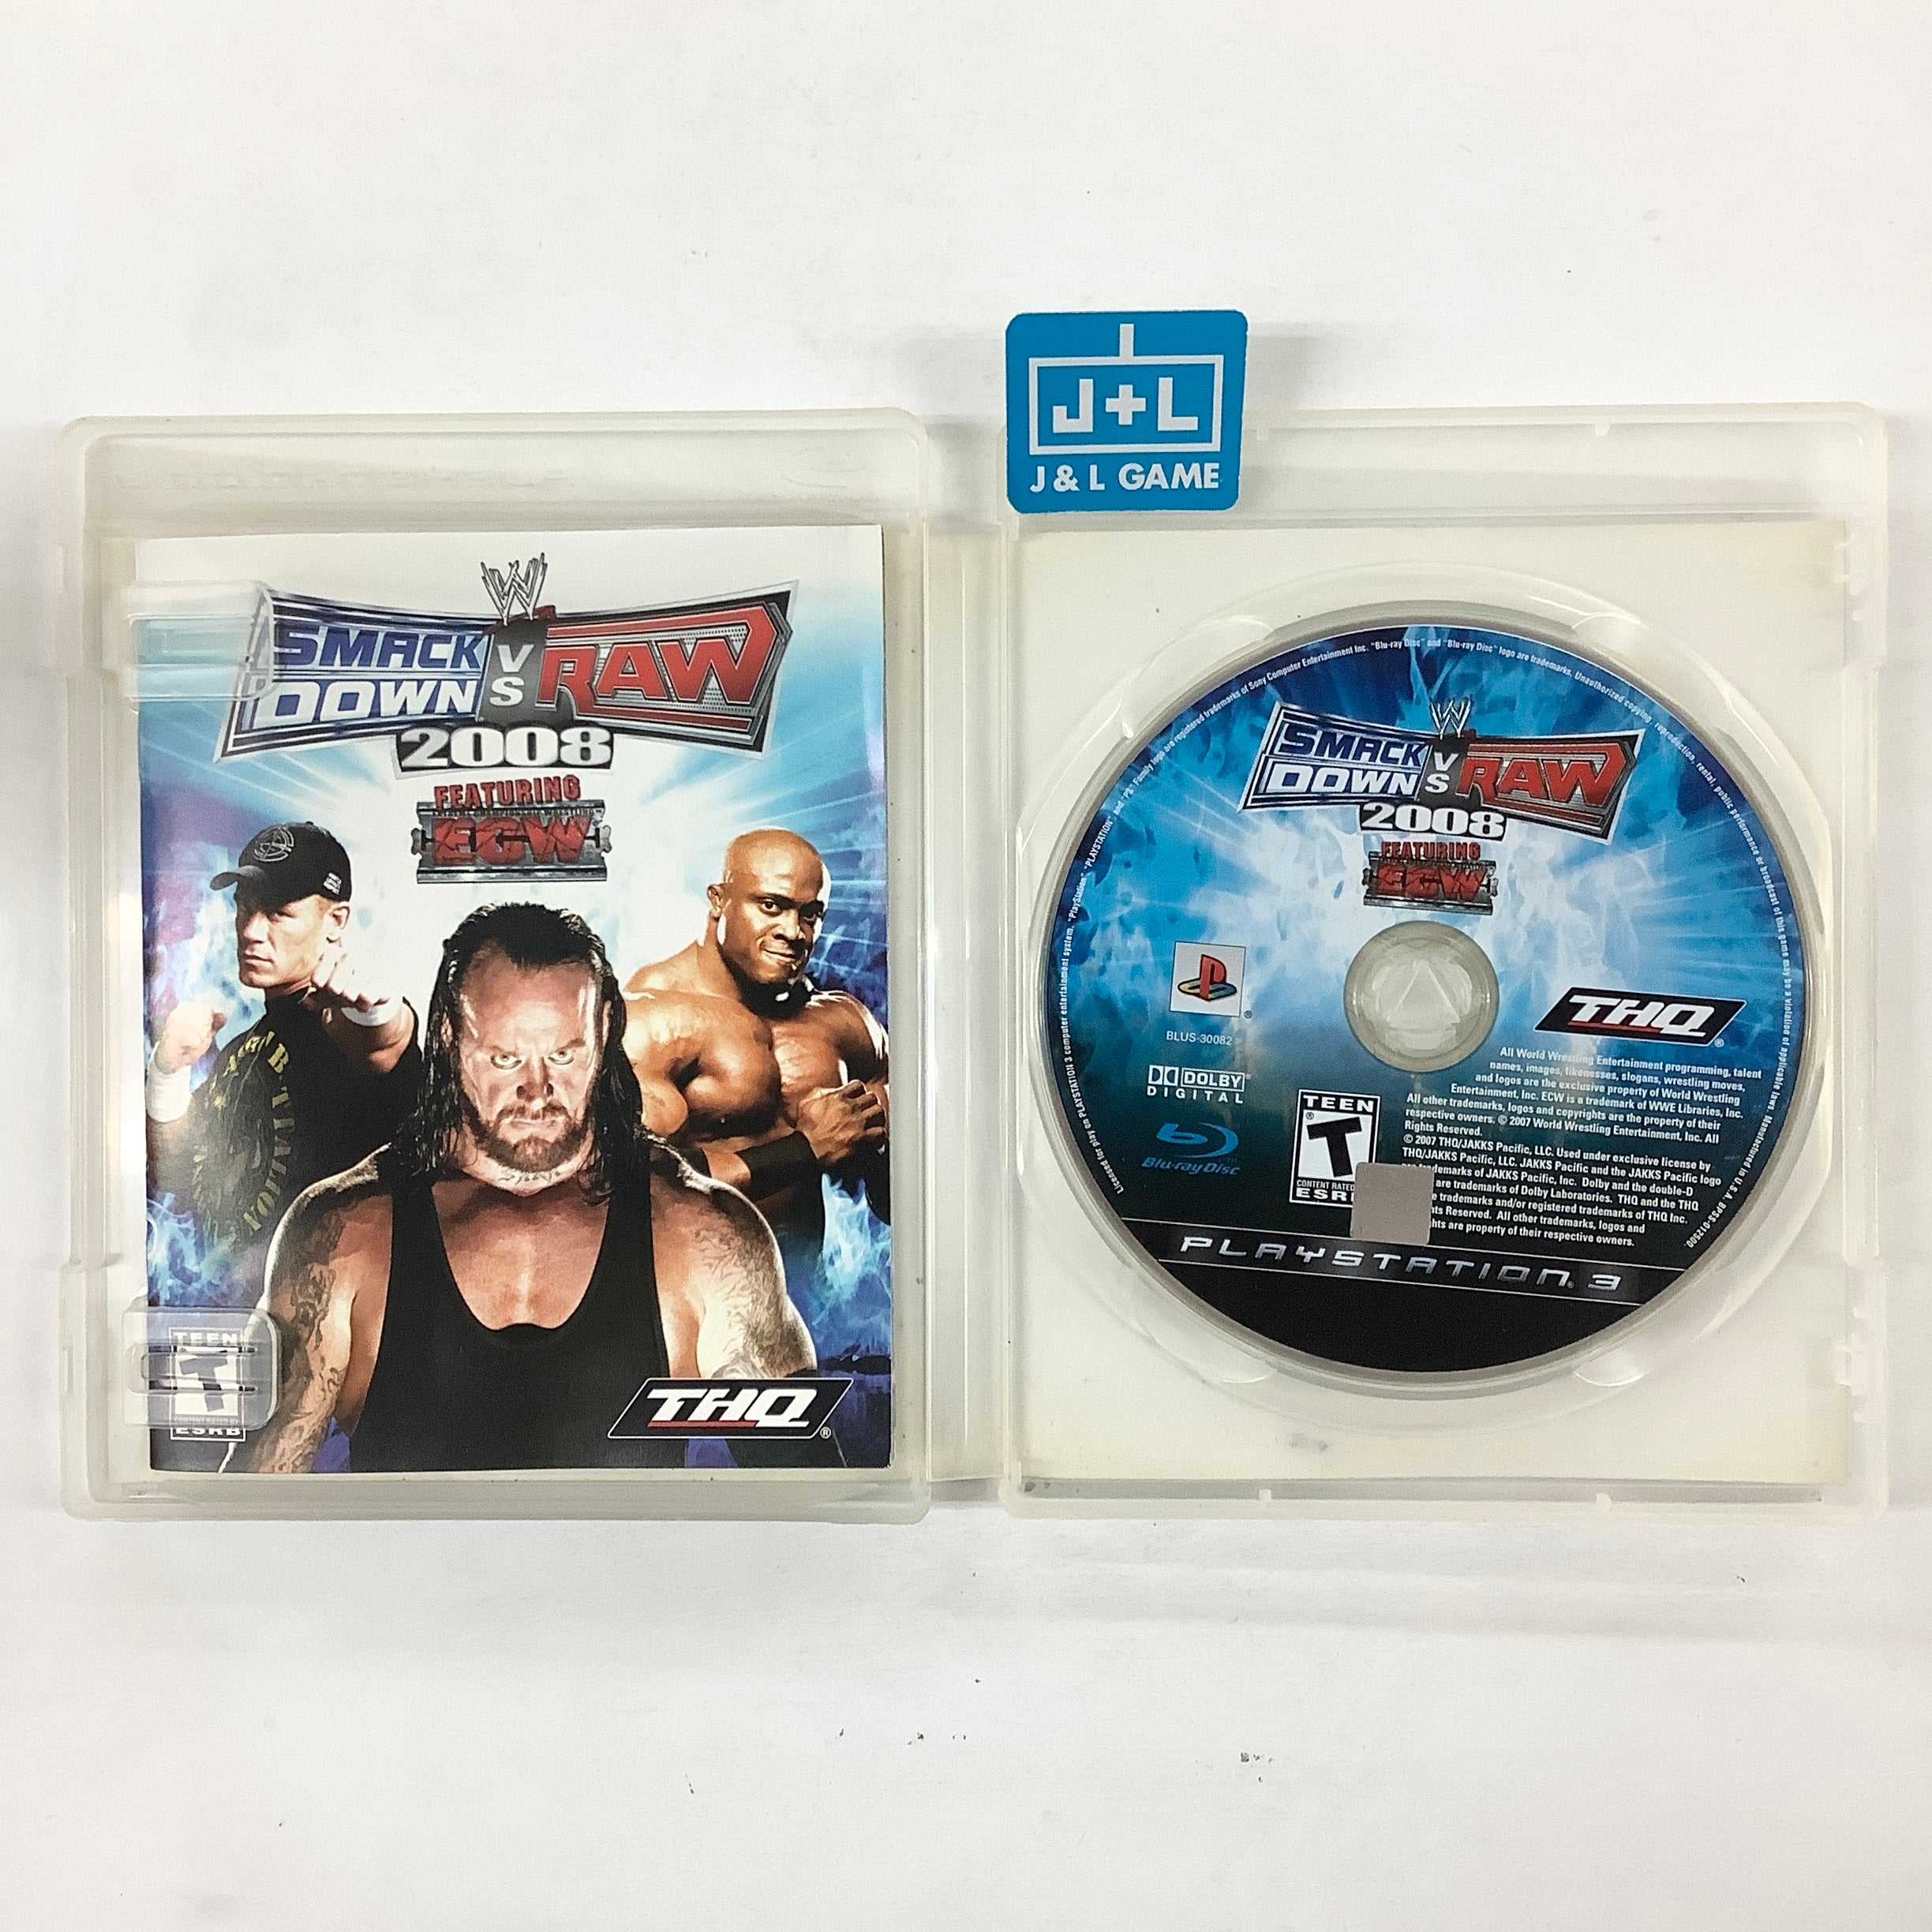 WWE SmackDown vs. Raw 2008 - (PS3) PlayStation 3 [Pre-Owned] Video Games THQ PRE-OWNED GAME DISC WITH GAME CASE AND GAME MANUAL  